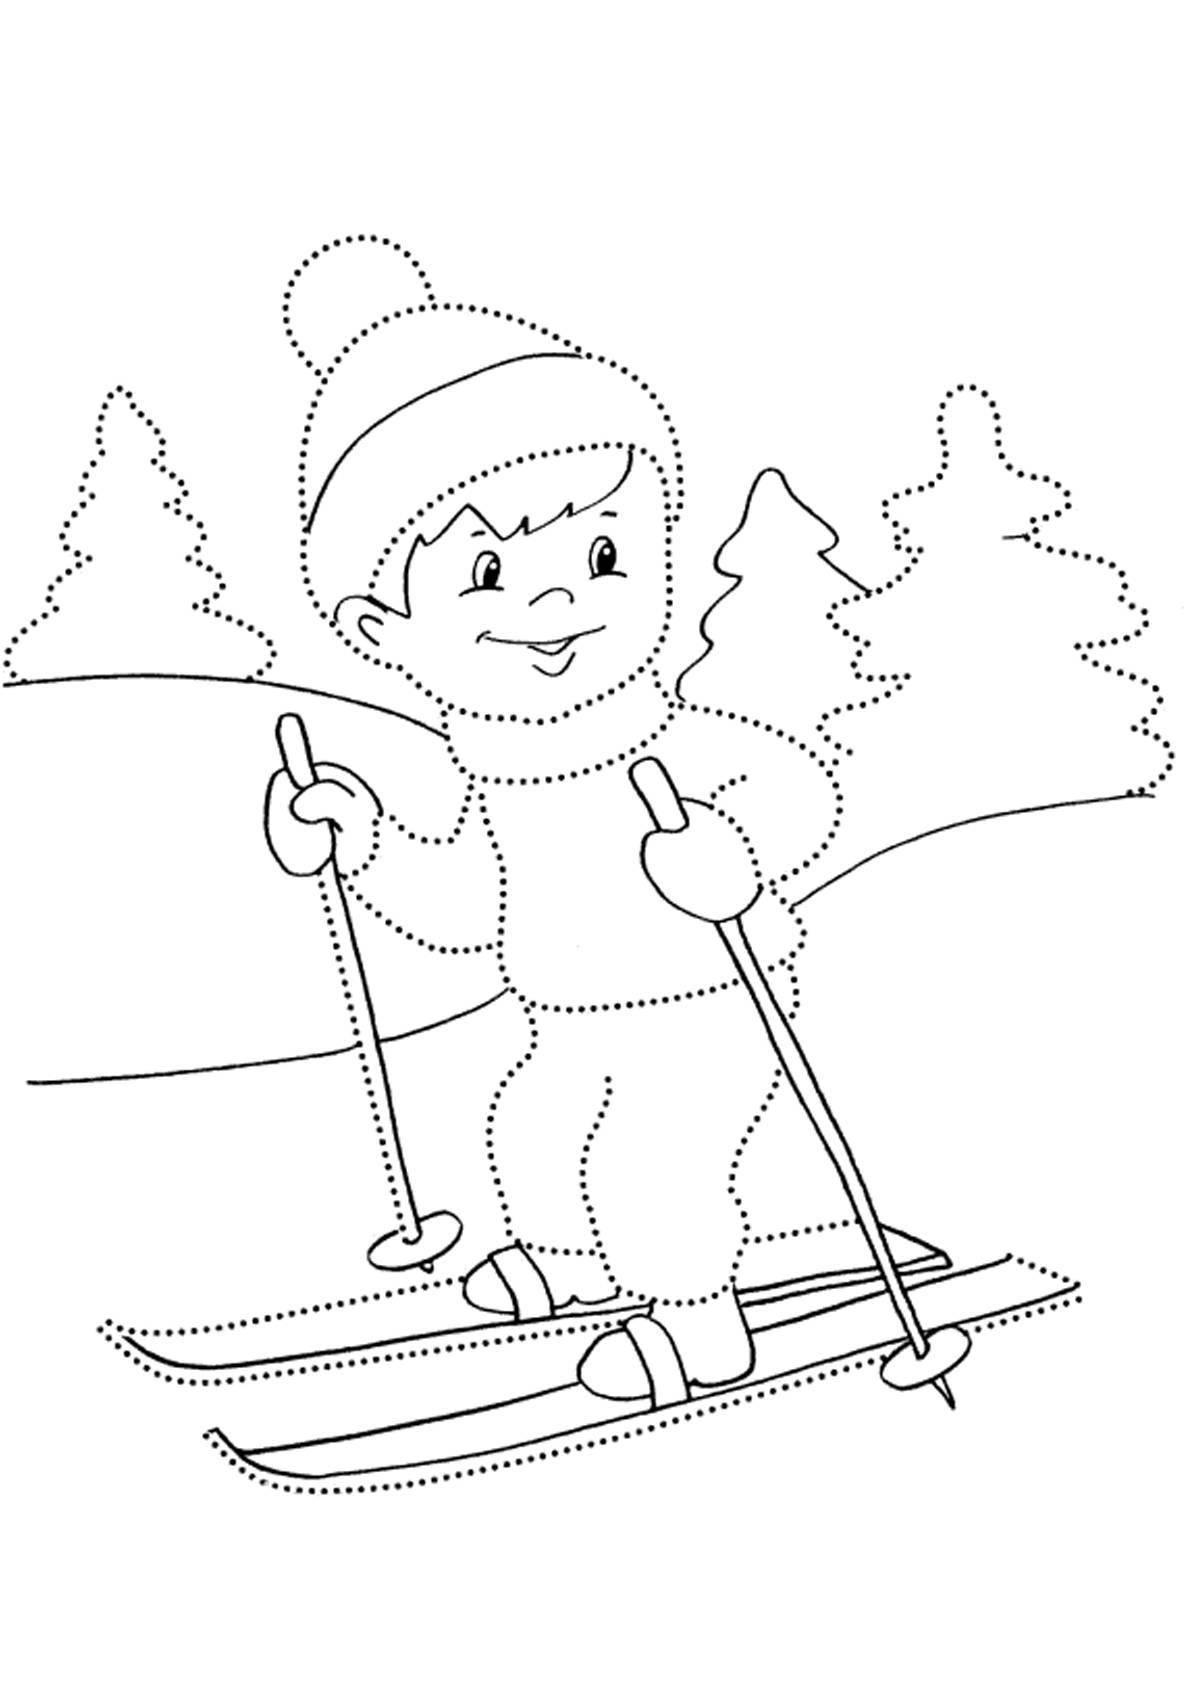 Exquisite winter sports coloring book for kids